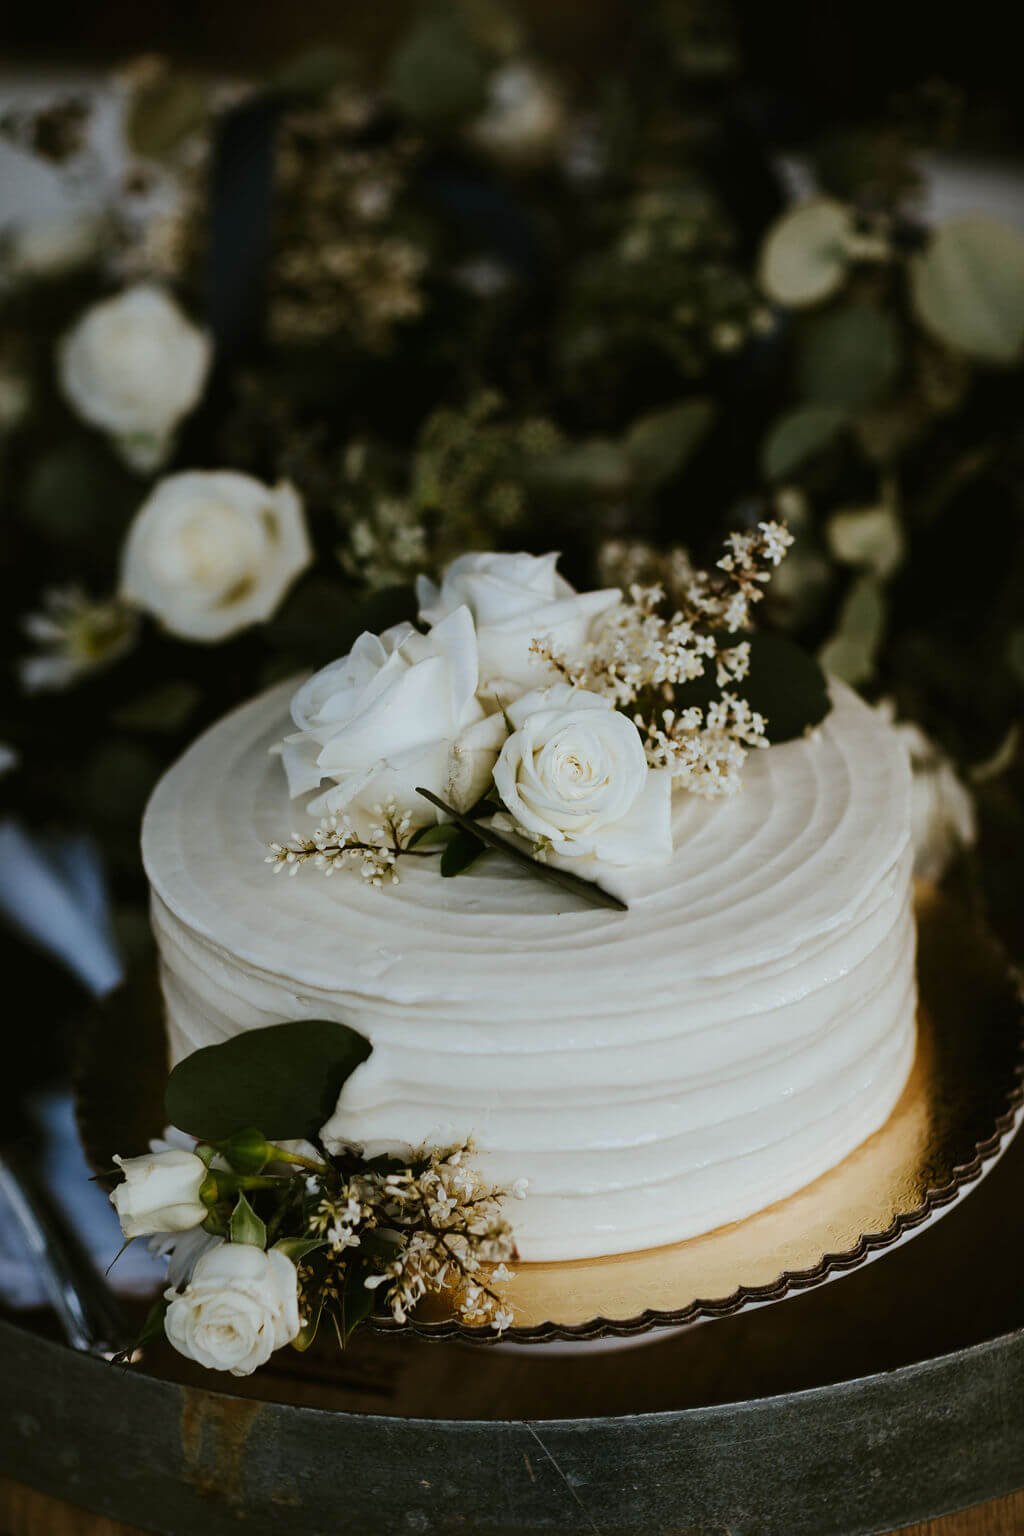 Simple white wedding cake decorated with white roses and dark greens